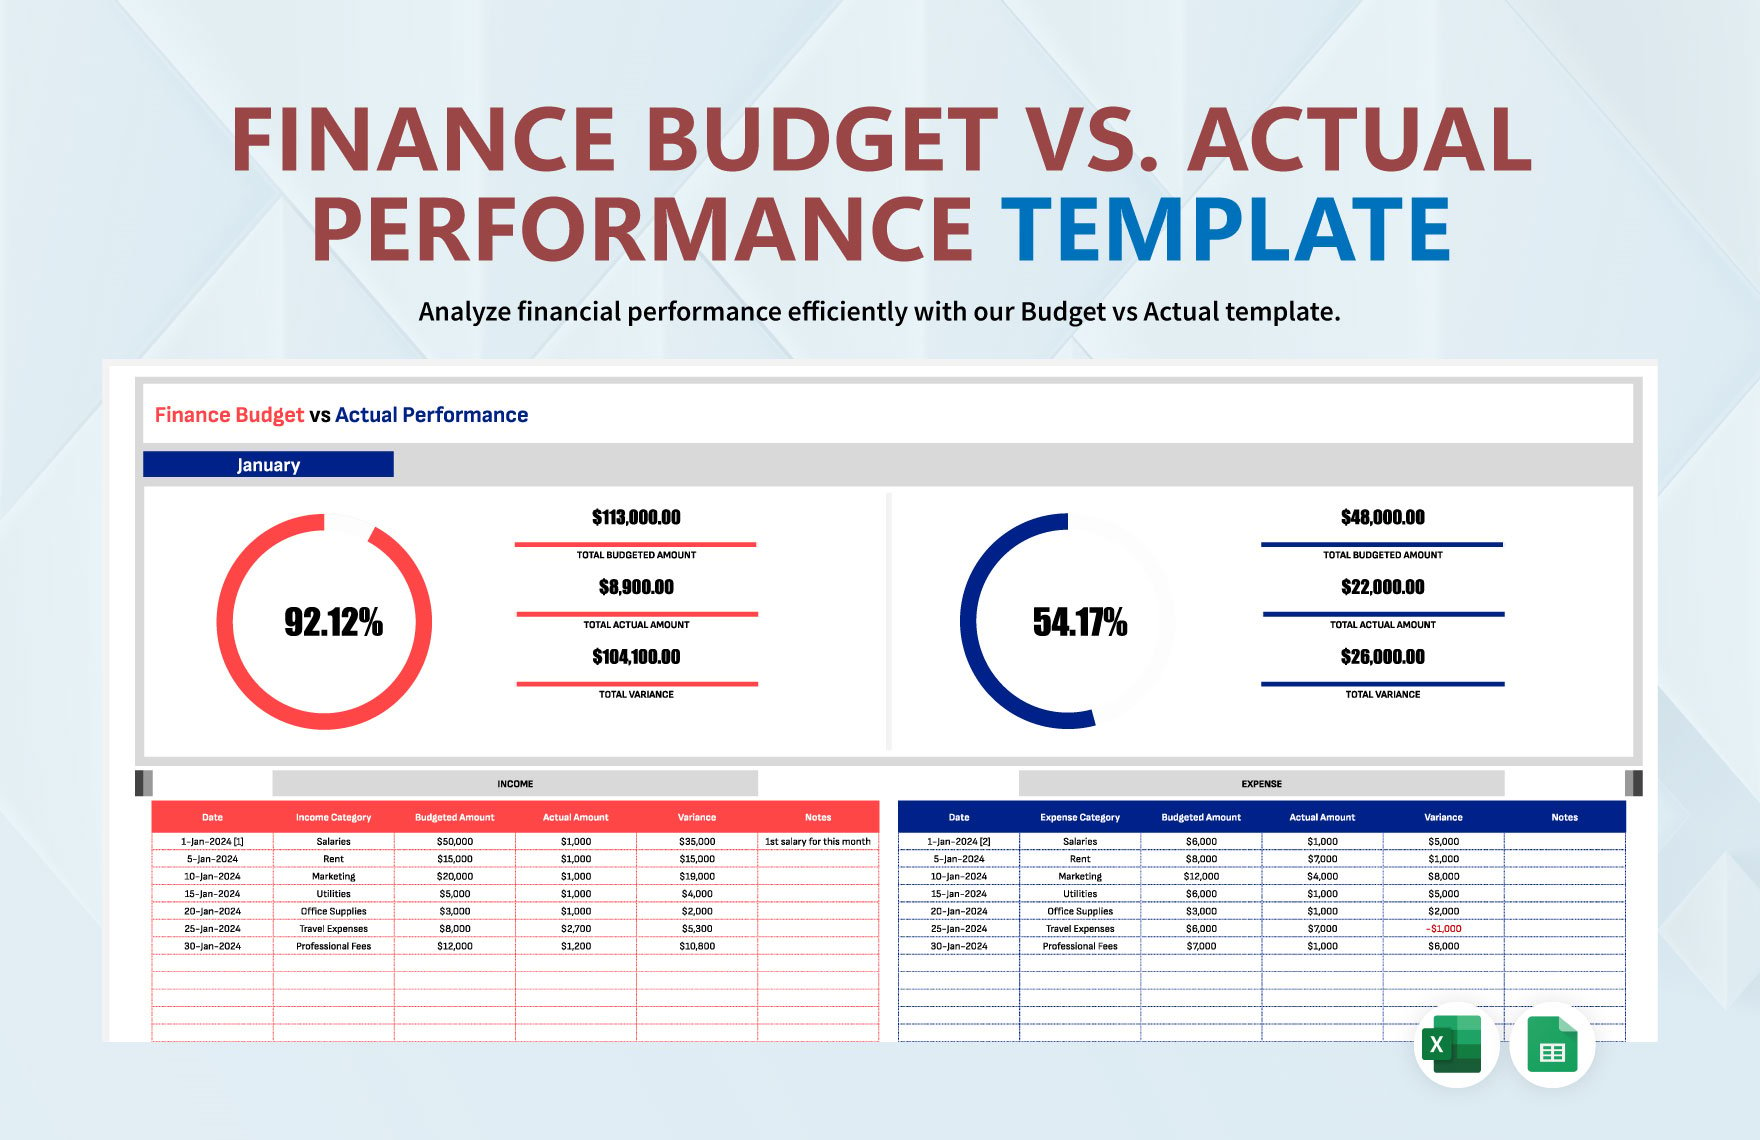 Finance Budget vs Actual Performance Template